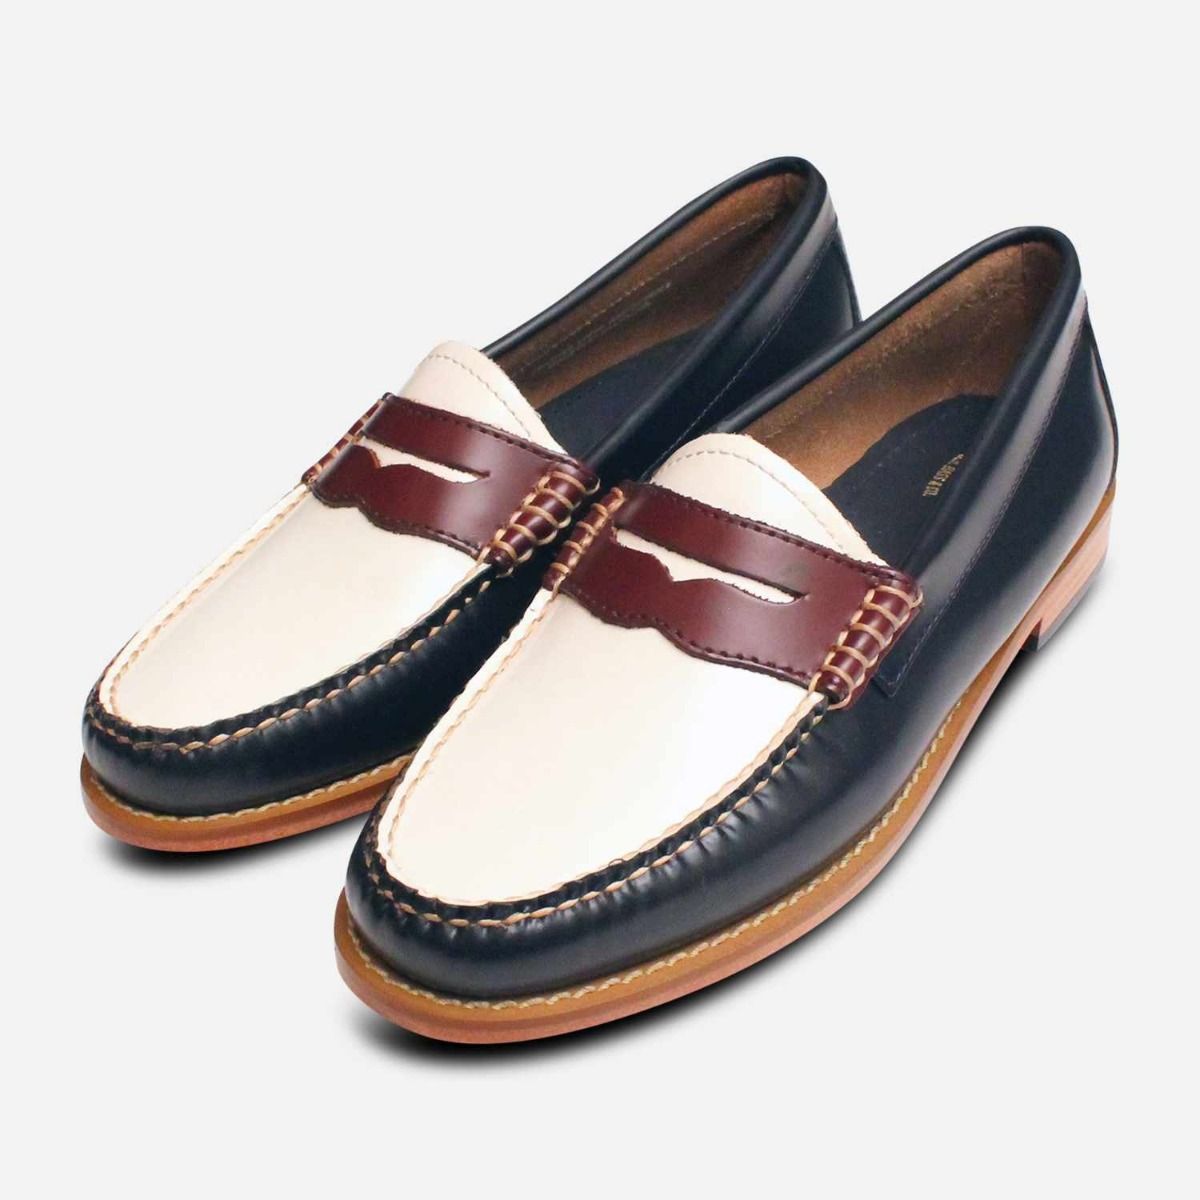 Bass Weejun Tricolore Spectator Shoes in White Navy Wine